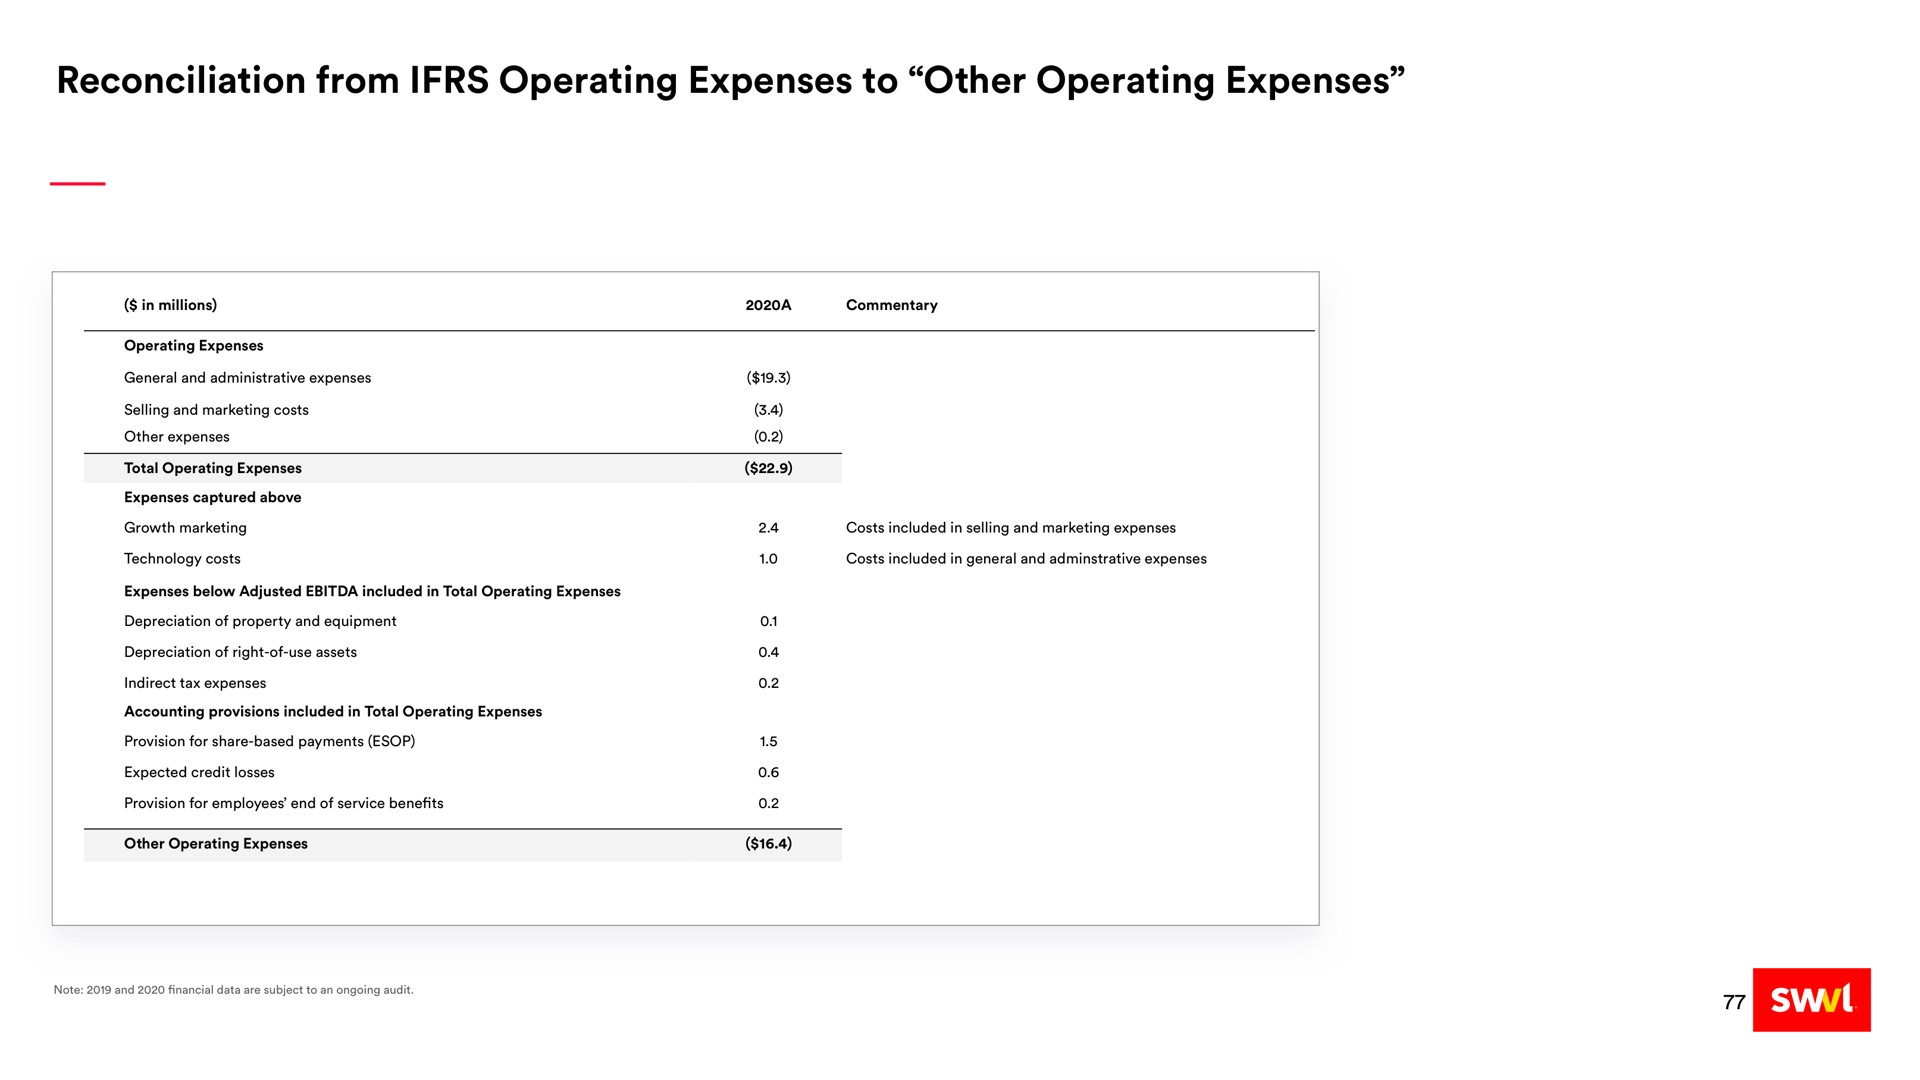 reconciliation from operating expenses to other operating expenses | Swvl